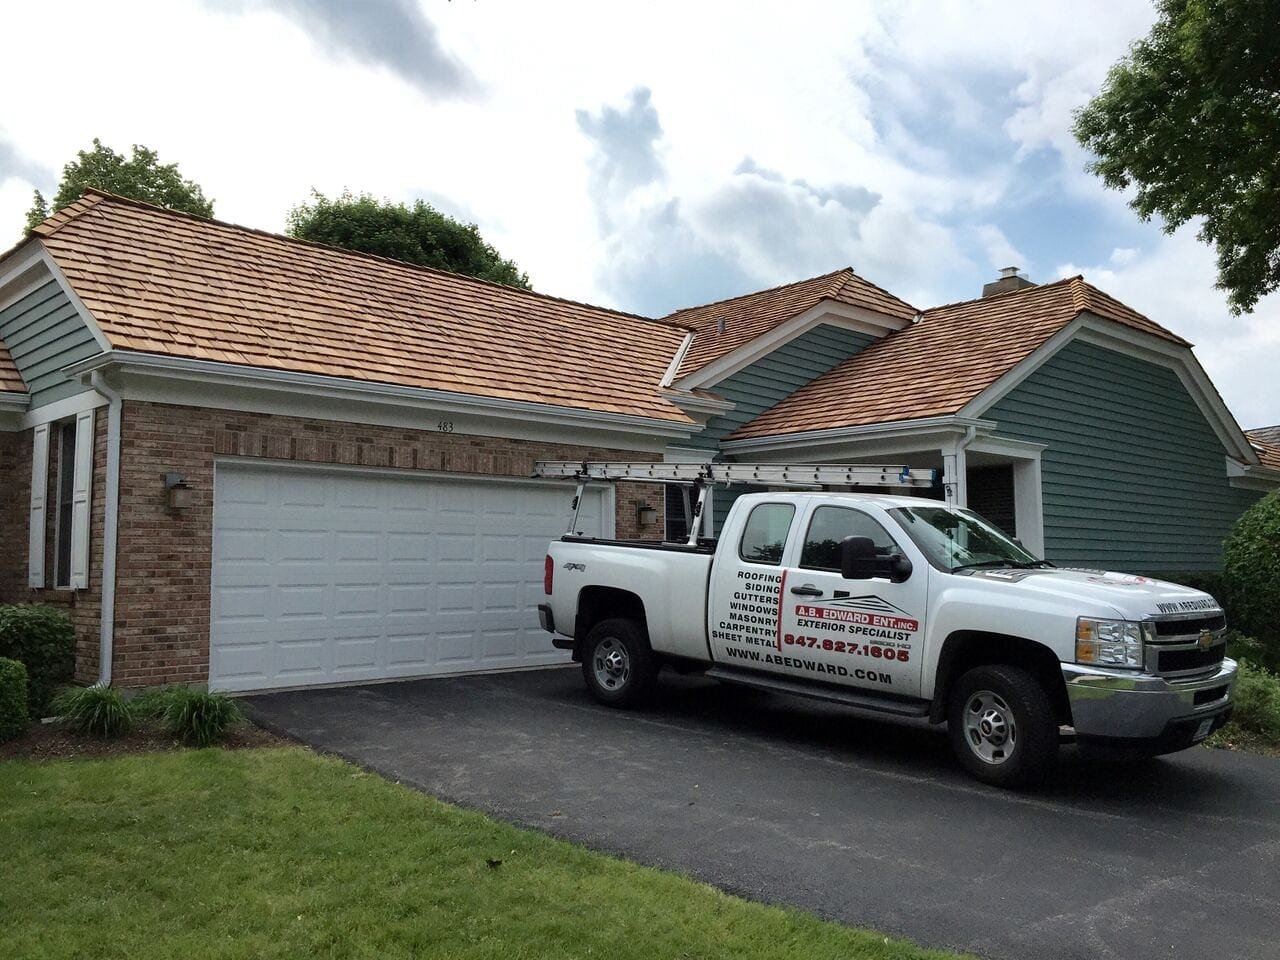 Get a roofing inspection to keep your roof healthy